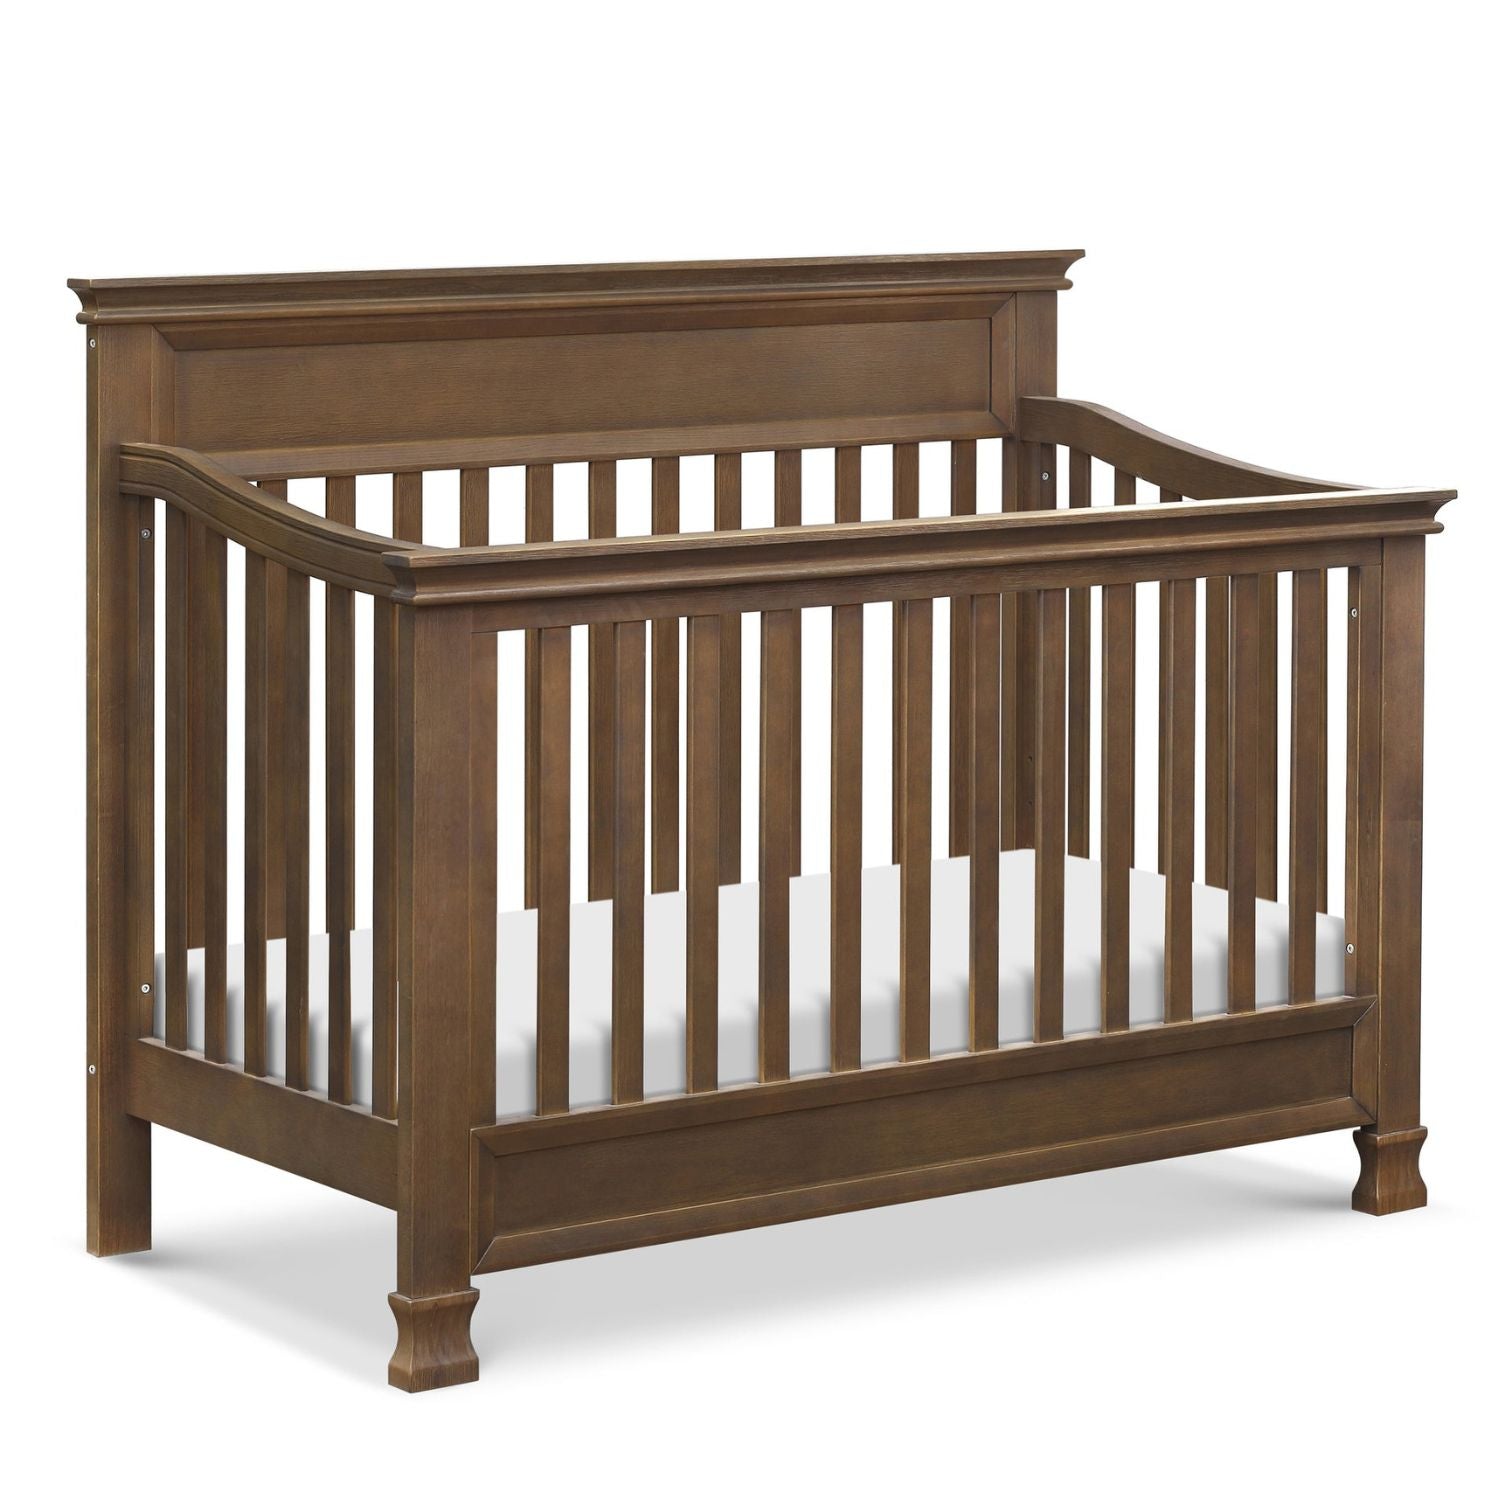 Foothill 4-in-1 Convertible Crib - NMSK